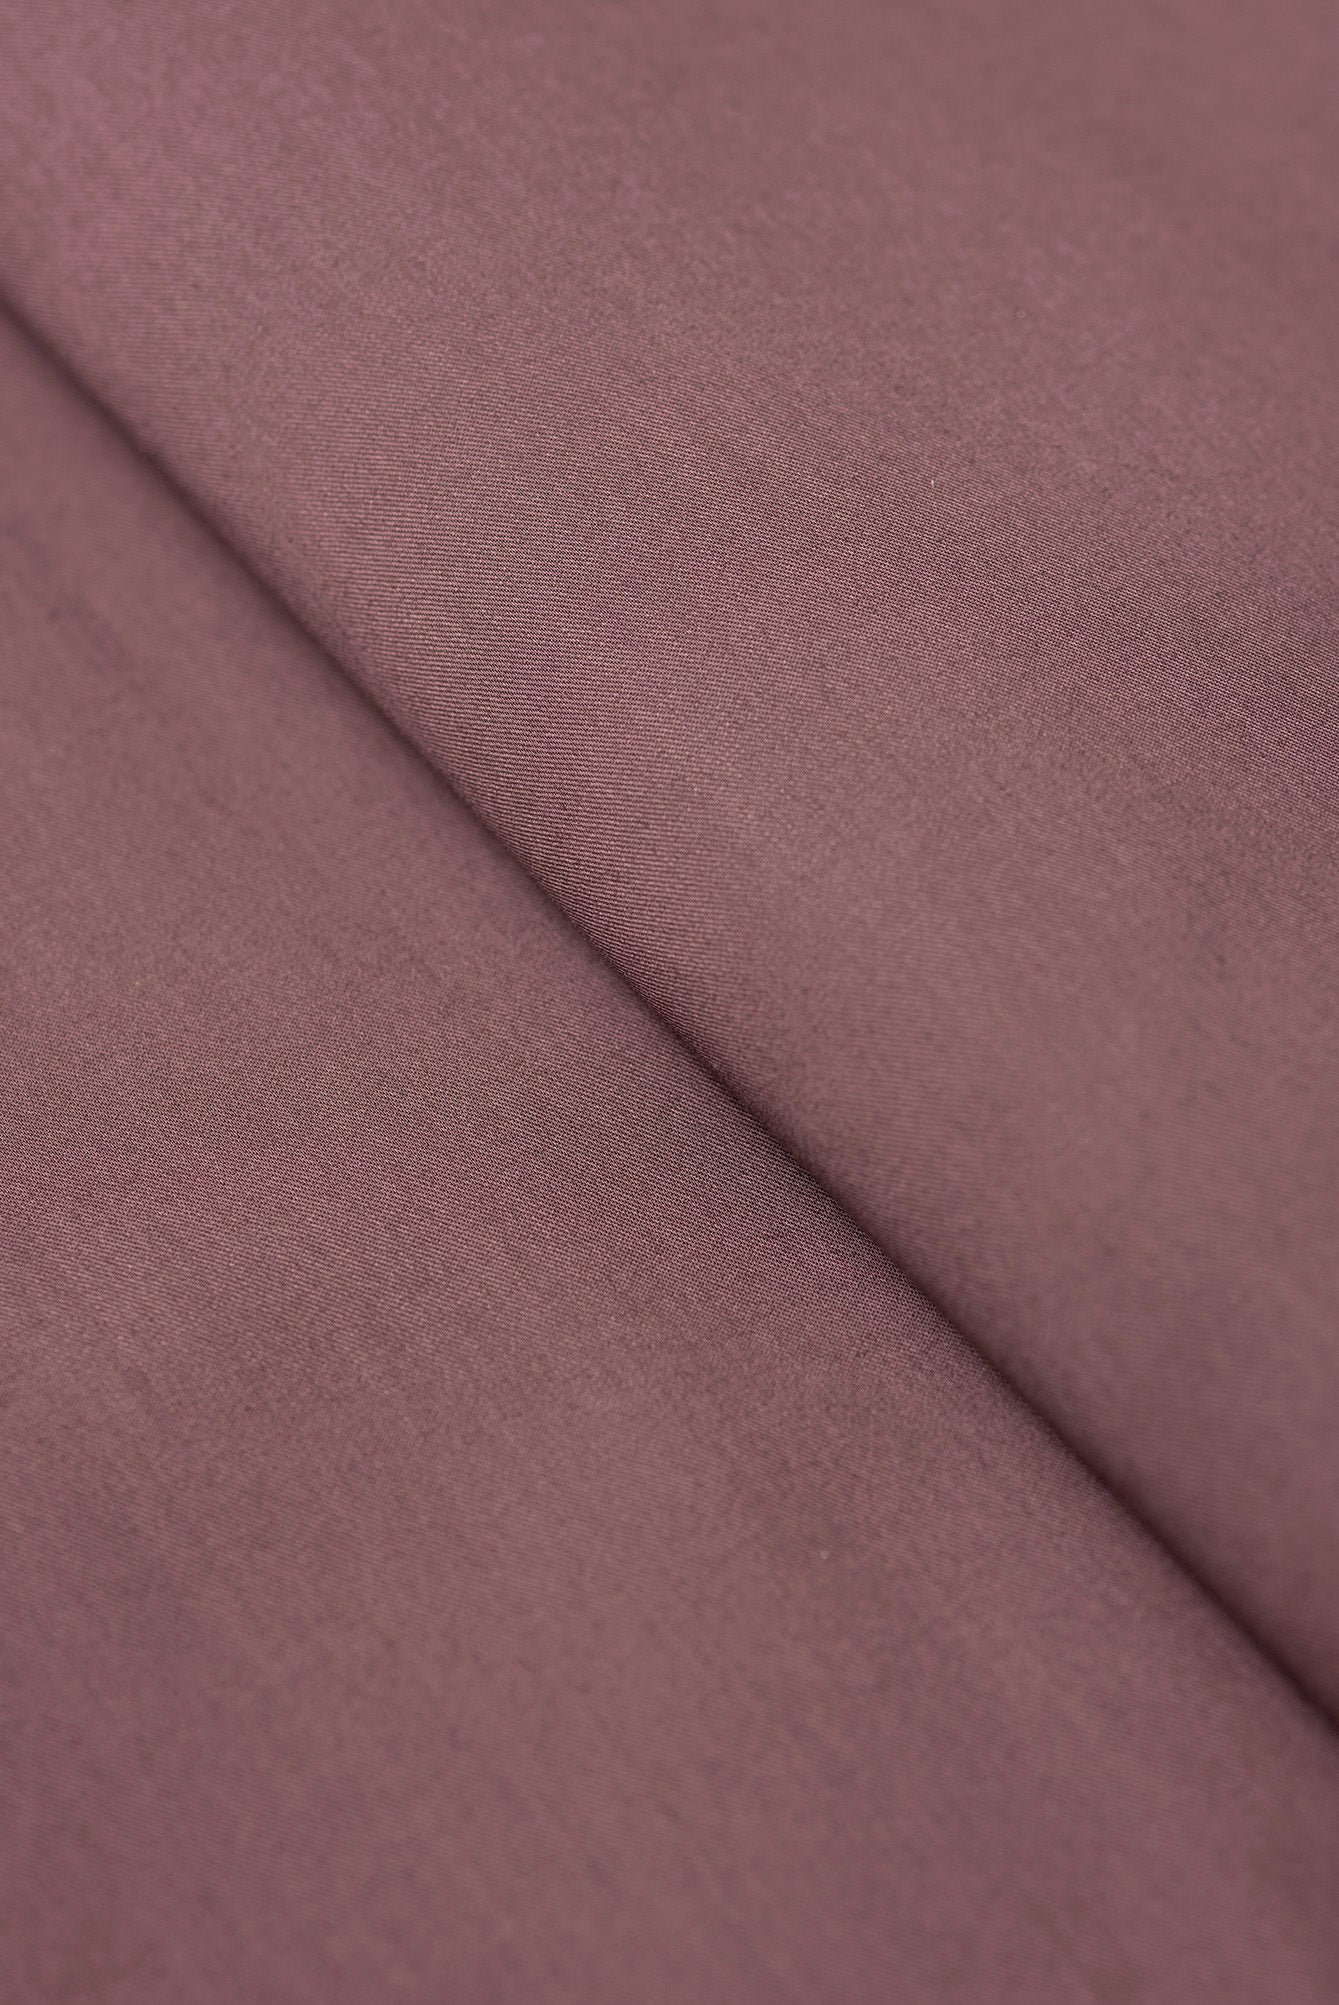 COTTON FABRIC WOOD BROWN GLF-IMPERIAL